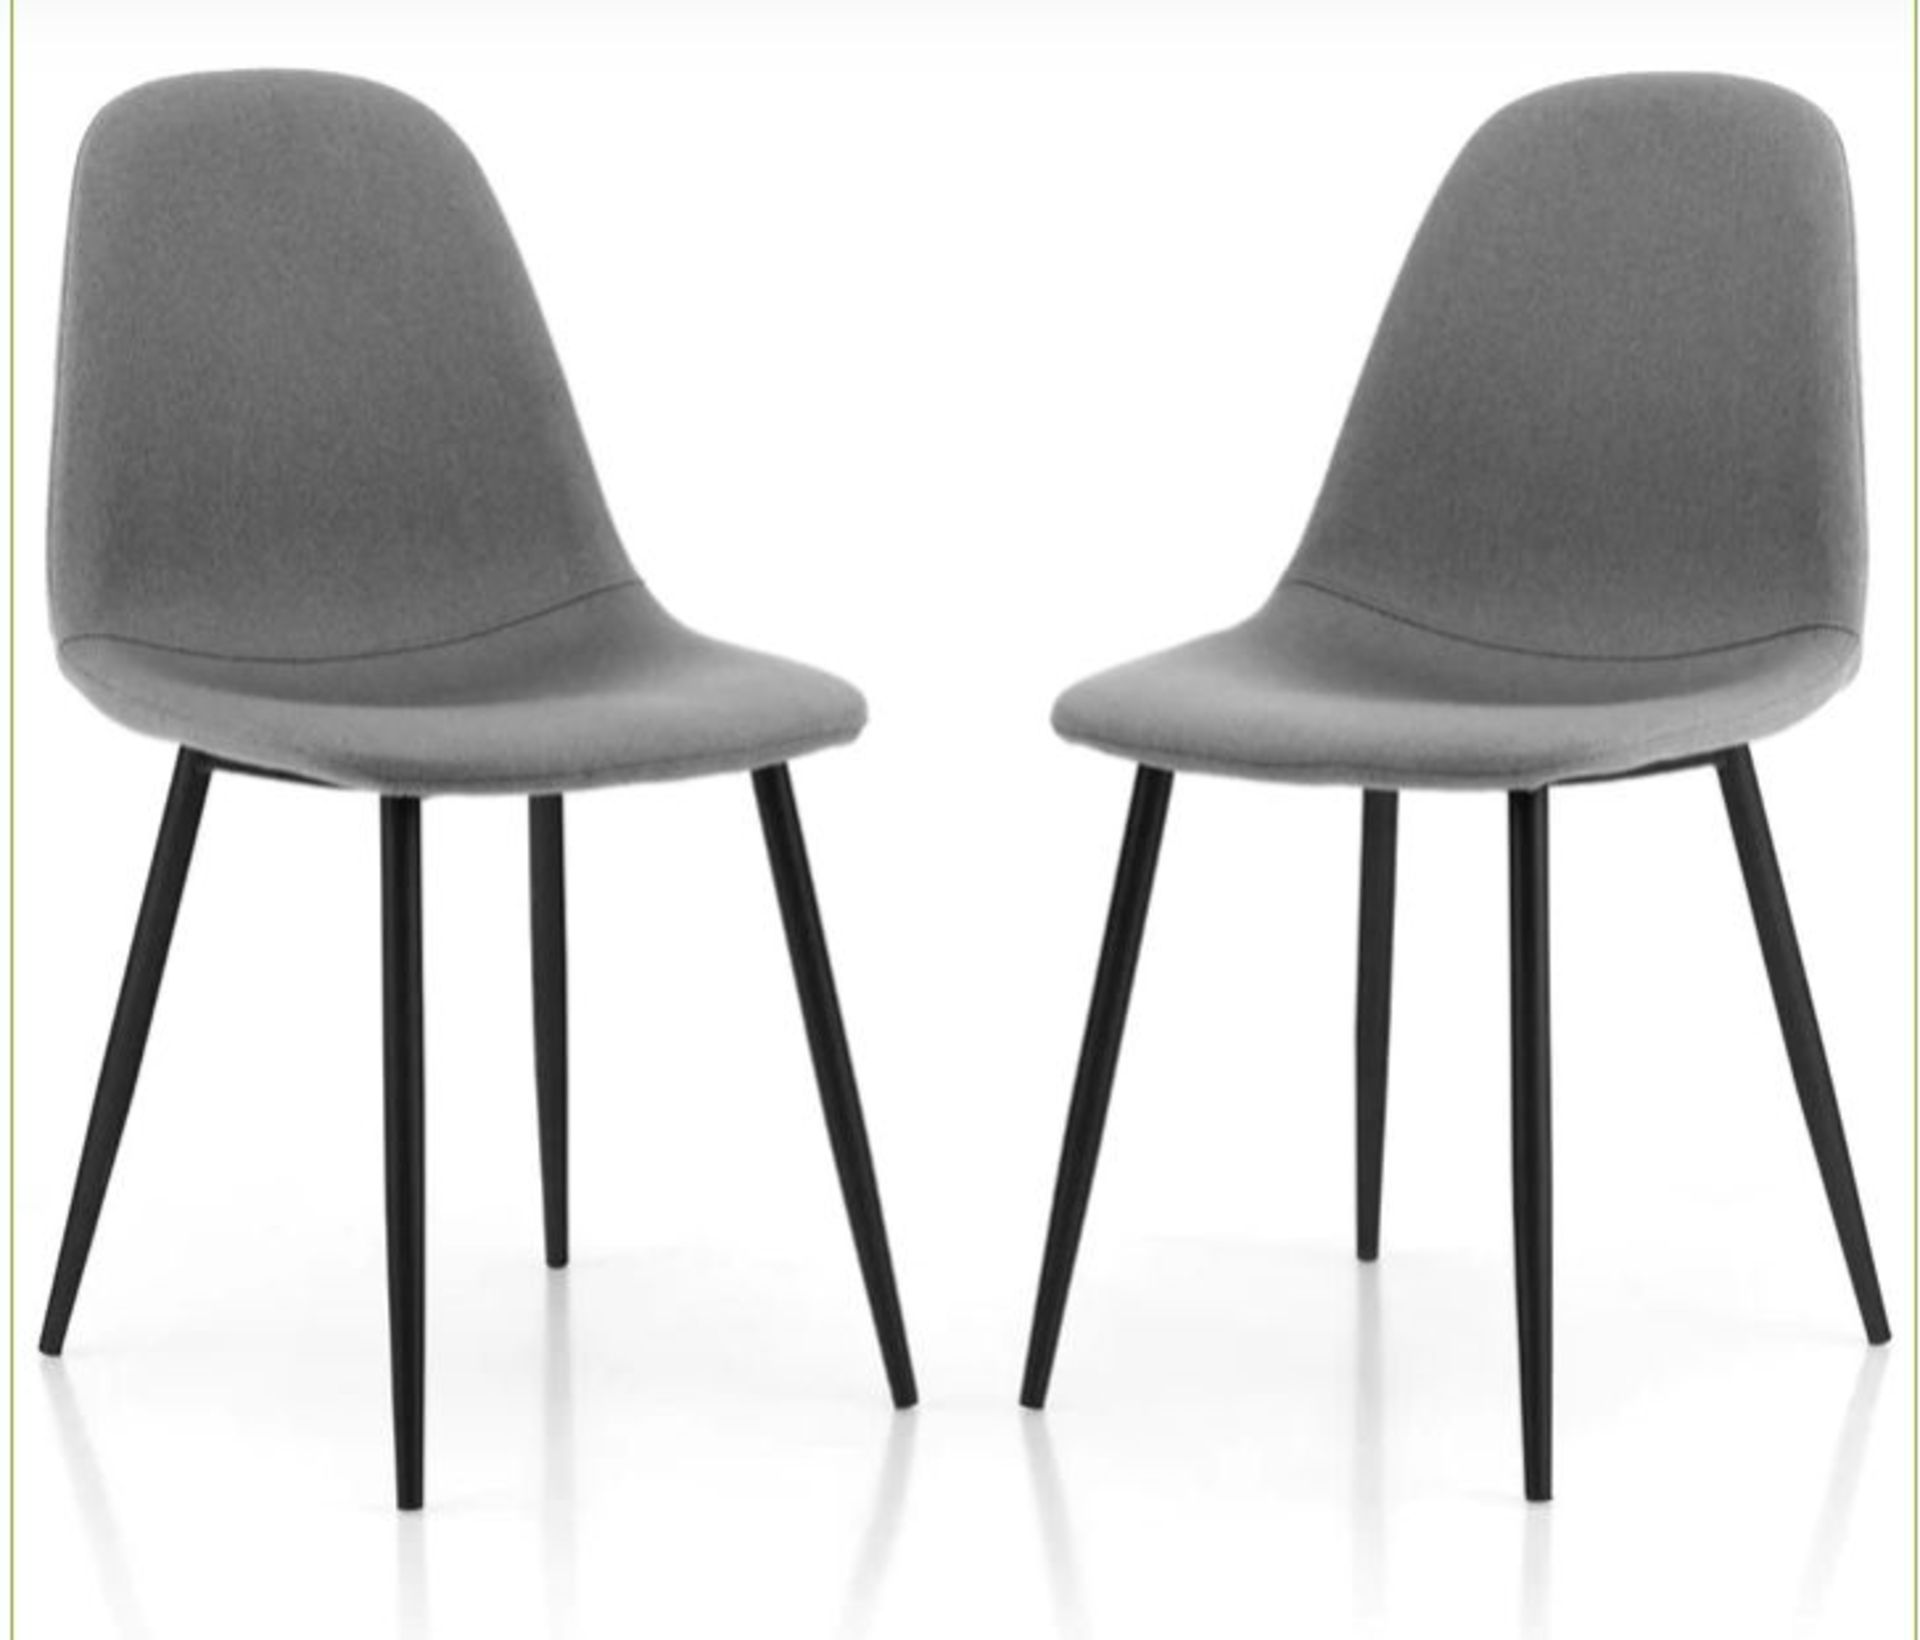 UPHOLSTERED DINING CHAIRS SET OF 2 WITH METAL LEGS-GREY. - ER53. The high rebound foam upholstered